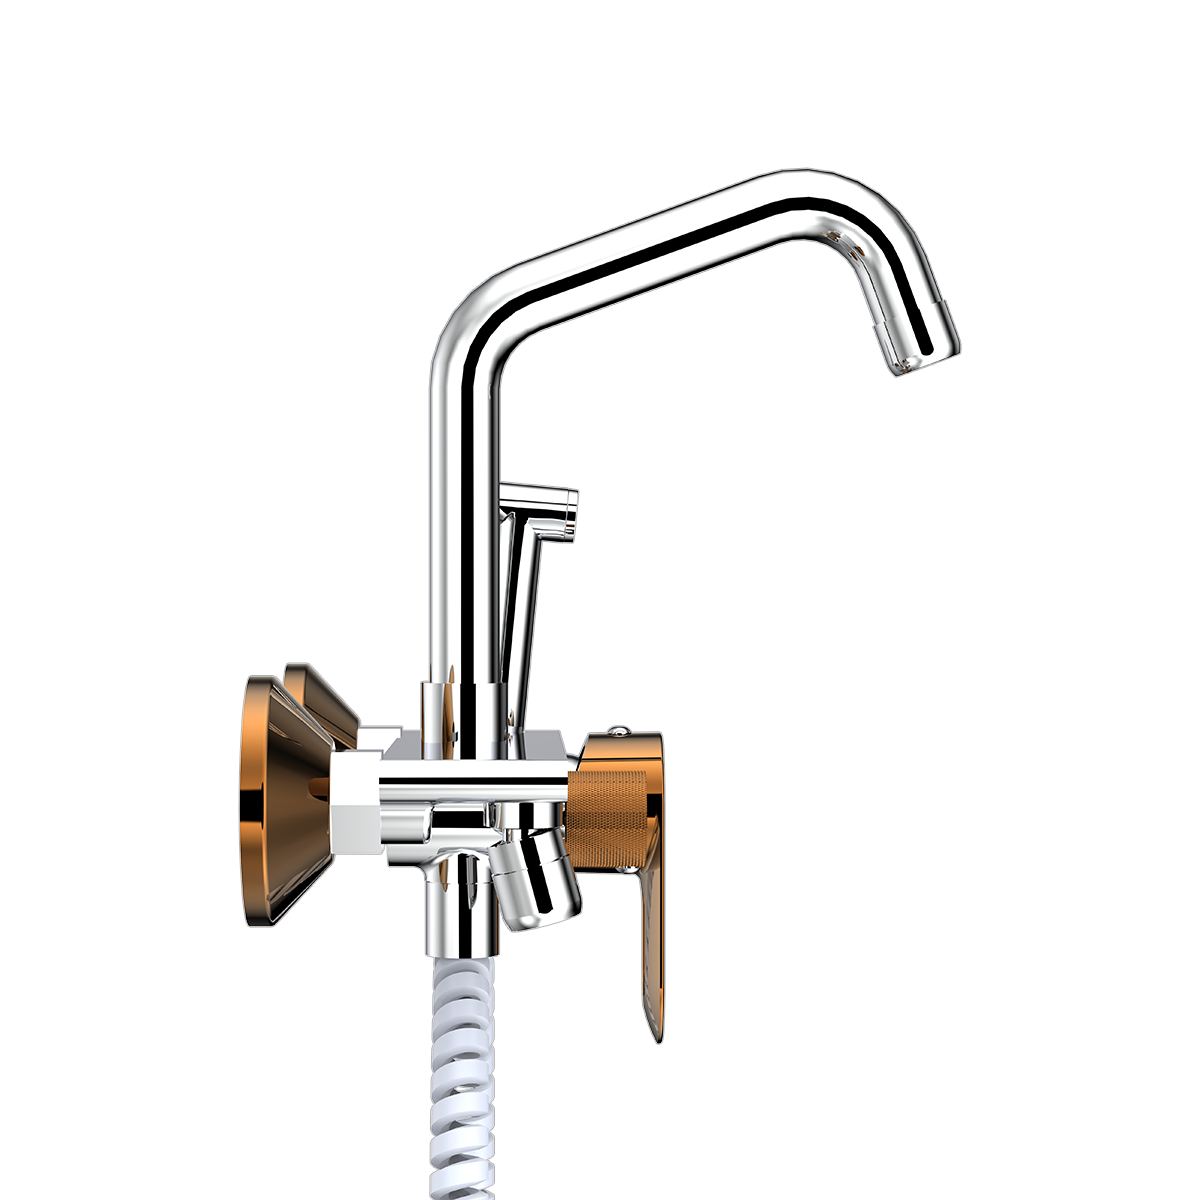 Wall Mounted Sink Mixer With Swivel Spout & Hand Shower